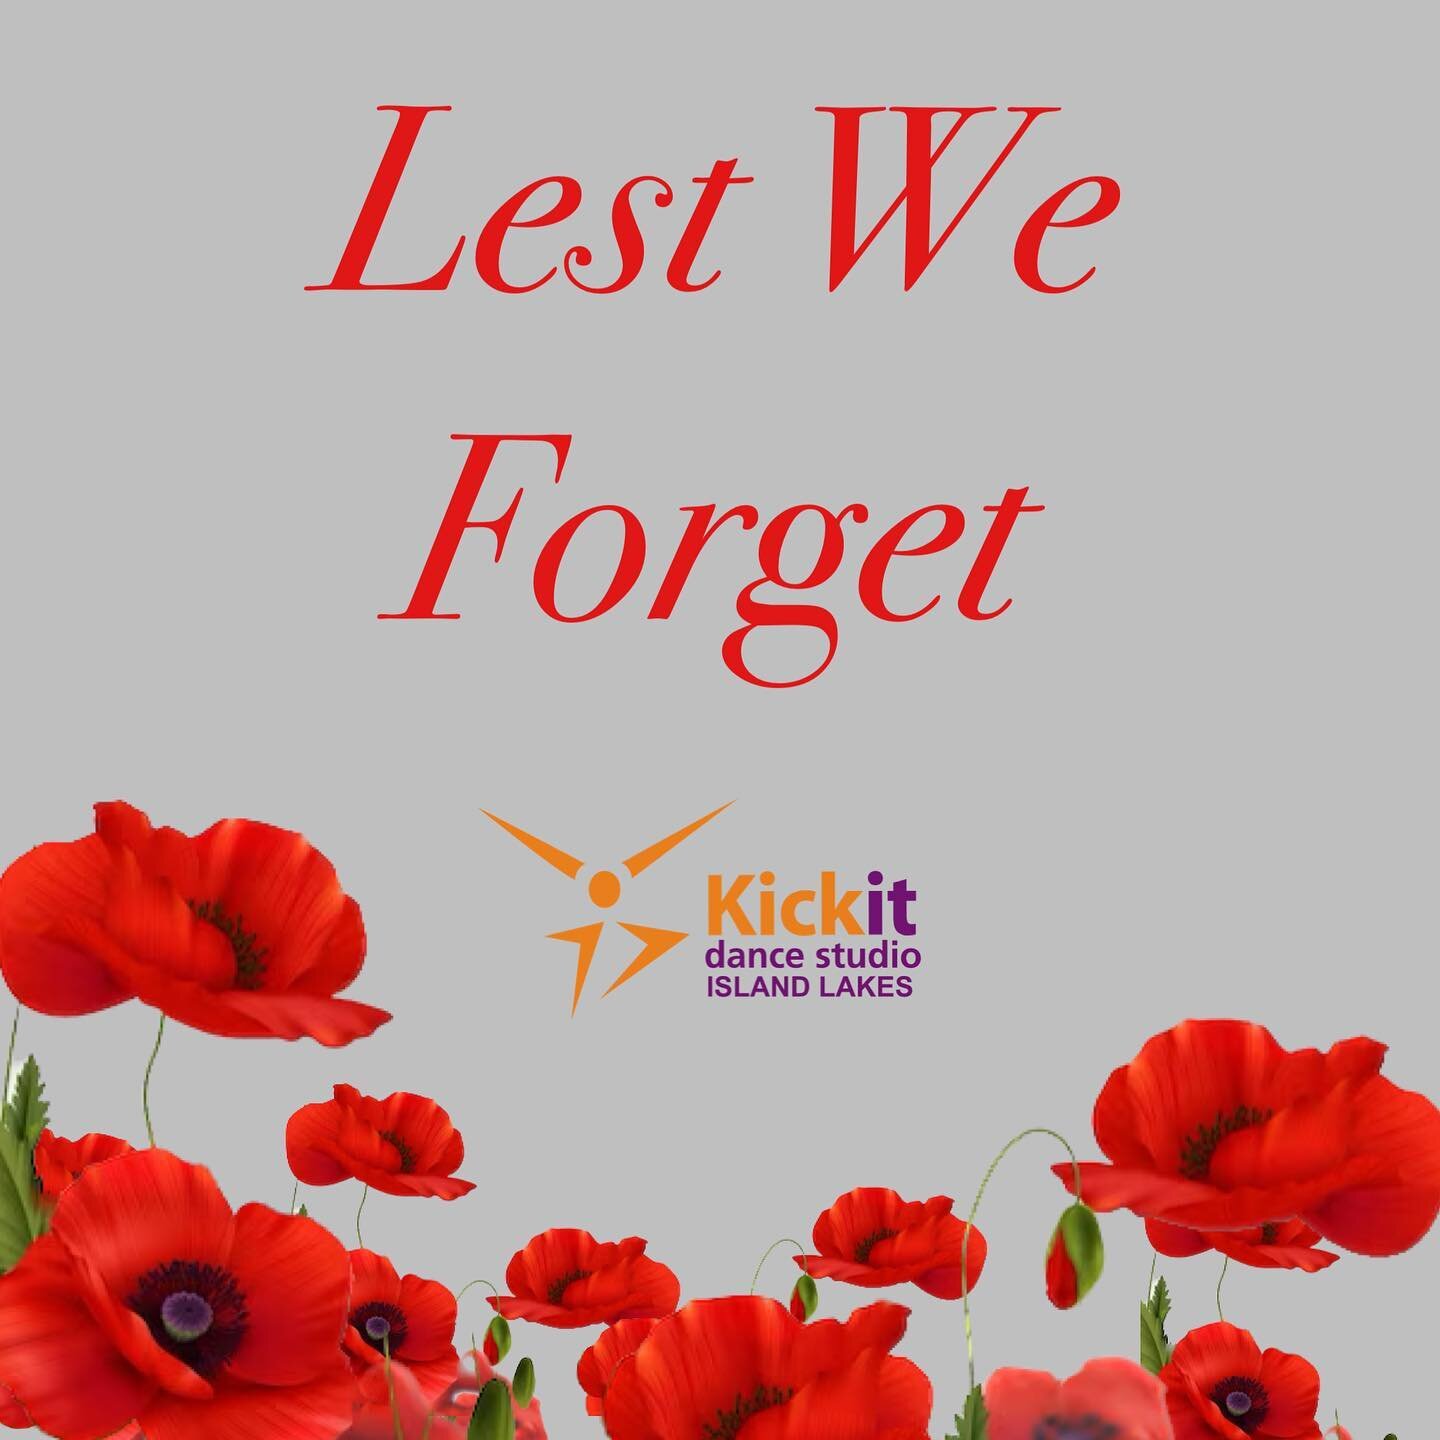 Thank you to all those who served and sacrificed for our freedoms. And also to those who continue to serve. 

There will be no classes today in honour of Remembrance Day.